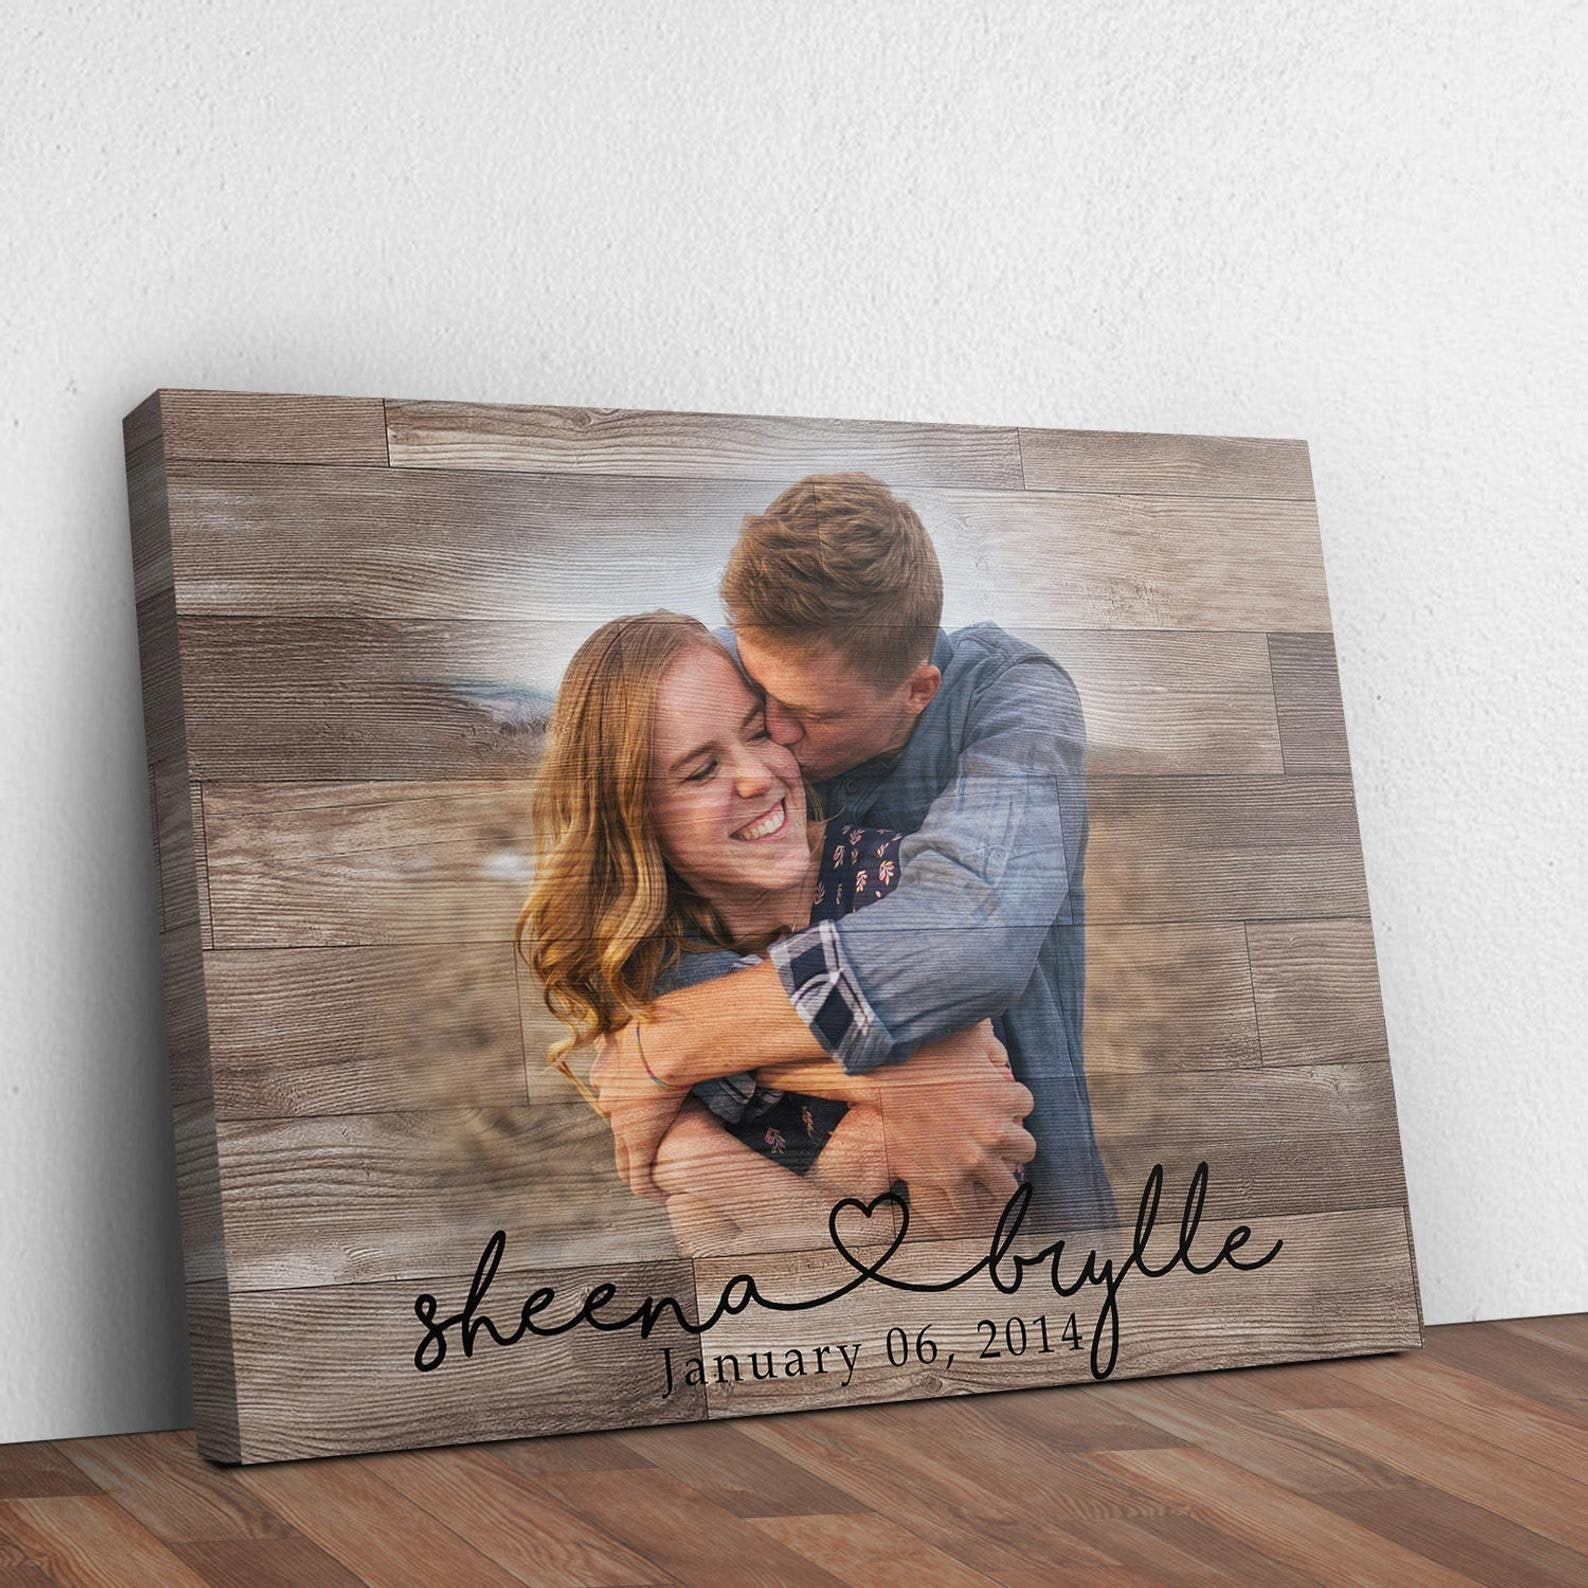 IAXIC Honeymoon Gifts Photo Frame Wedding Gifts for Couple Bride And Groom  Gifts Newly Wed Gifts for The Couple Bridal Shower Gifts Vintage Floral